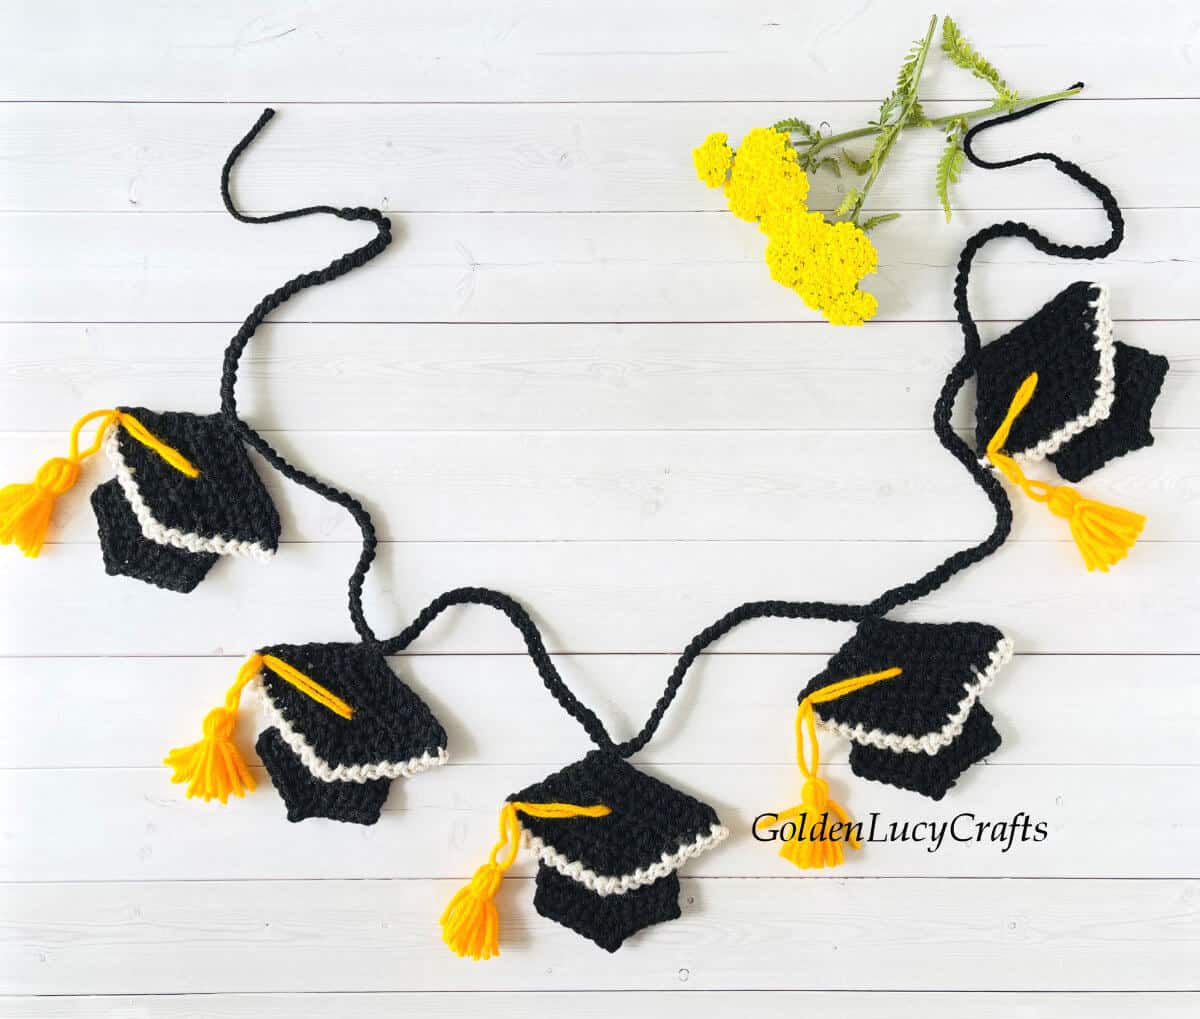 Crocheted graduation garland laying on the surface, yellow flowers in the background.